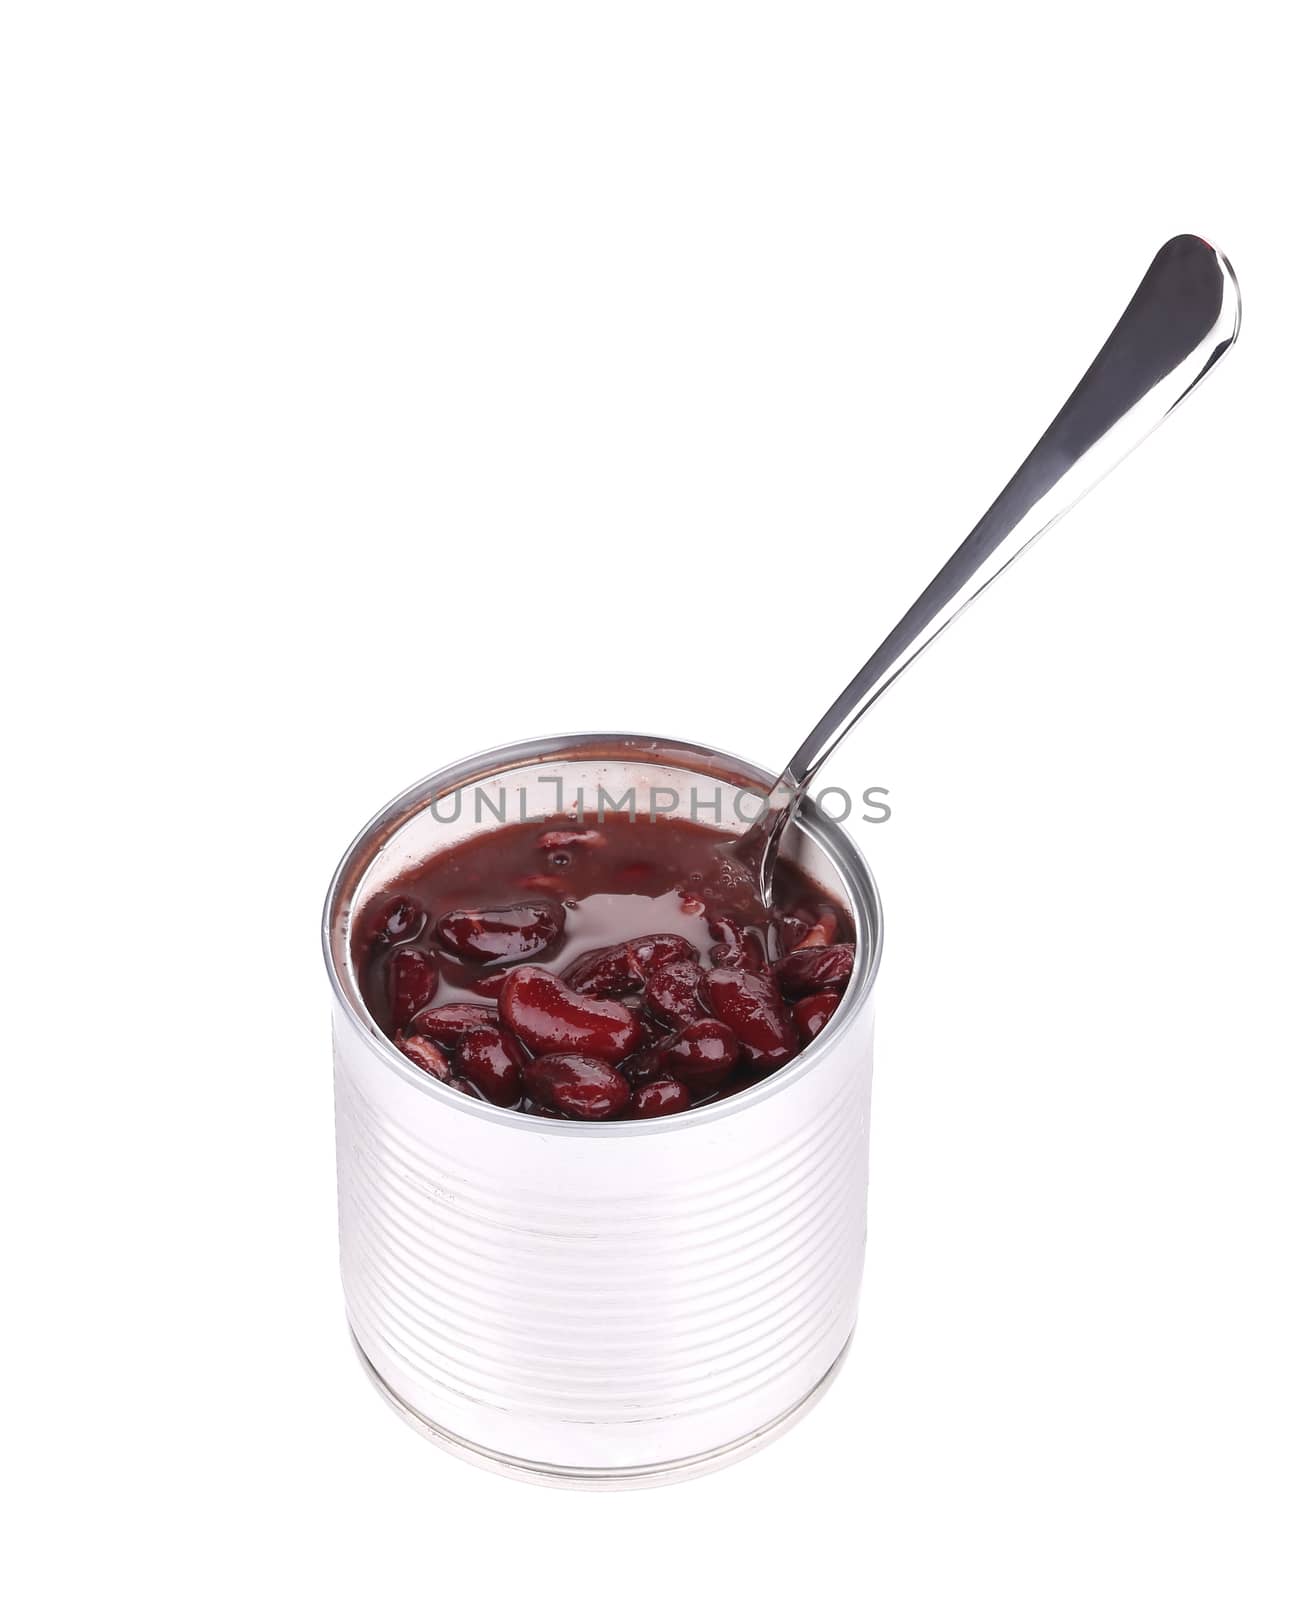 Tin of red bean with spoon. by indigolotos